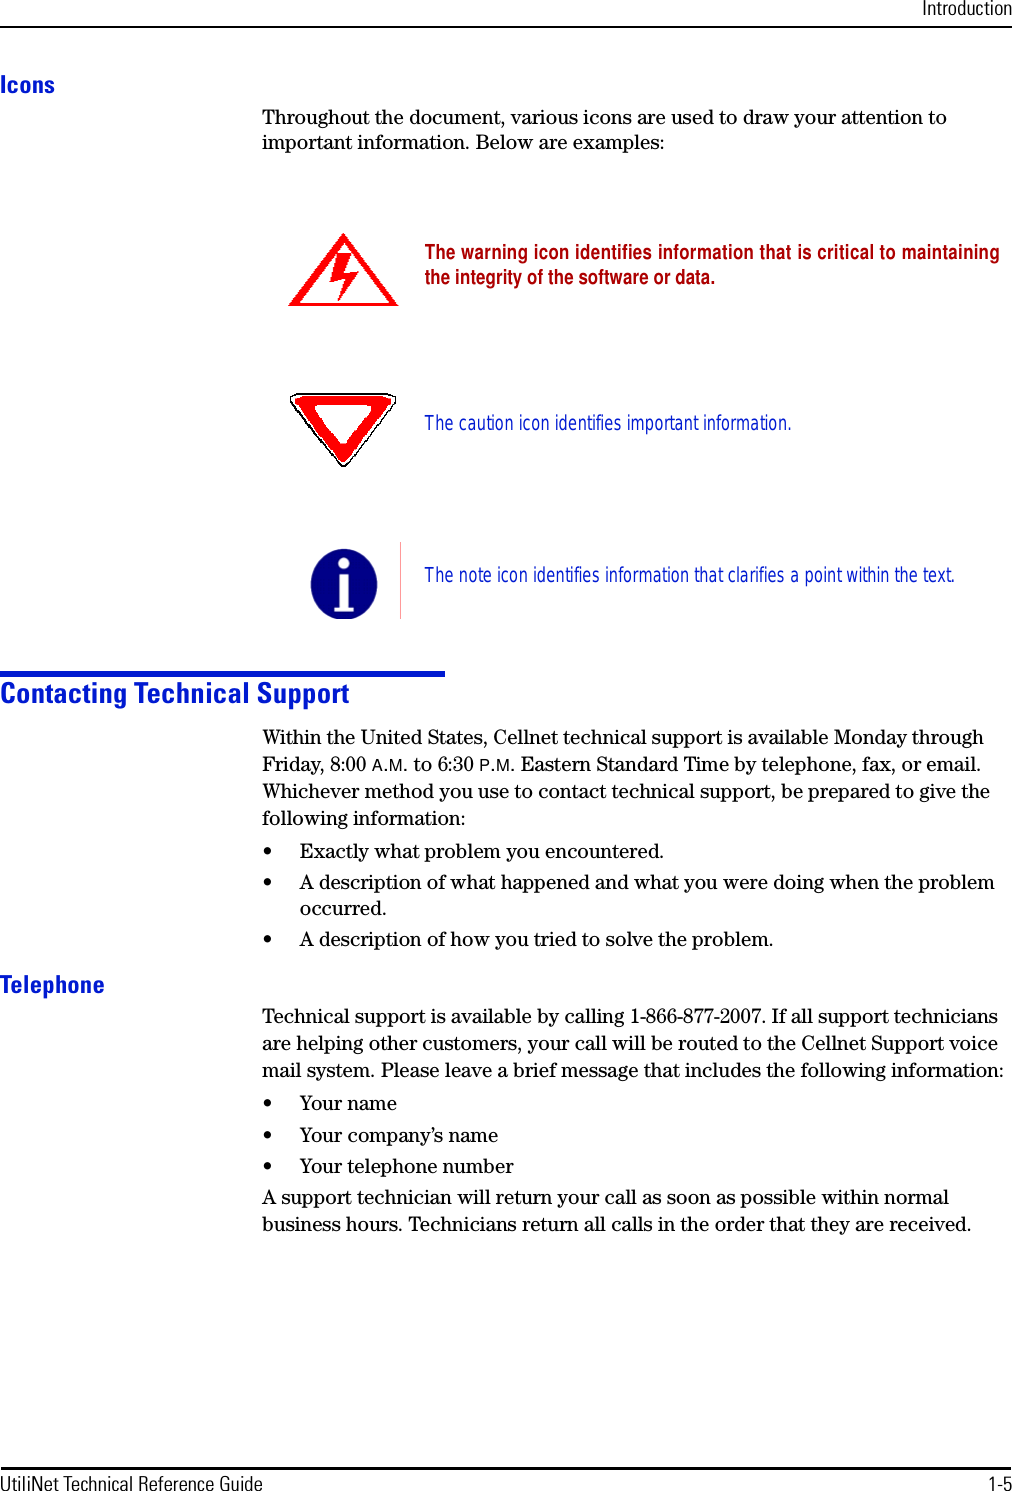 IntroductionUtiliNet Technical Reference Guide 1-5IconsThroughout the document, various icons are used to draw your attention to important information. Below are examples:Contacting Technical SupportWithin the United States, Cellnet technical support is available Monday through Friday, 8:00 A.M. to 6:30 P.M. Eastern Standard Time by telephone, fax, or email. Whichever method you use to contact technical support, be prepared to give the following information:• Exactly what problem you encountered.• A description of what happened and what you were doing when the problem occurred.• A description of how you tried to solve the problem.TelephoneTechnical support is available by calling 1-866-877-2007. If all support technicians are helping other customers, your call will be routed to the Cellnet Support voice mail system. Please leave a brief message that includes the following information:•Your name• Your company’s name• Your telephone numberA support technician will return your call as soon as possible within normal business hours. Technicians return all calls in the order that they are received.The warning icon identifies information that is critical to maintainingthe integrity of the software or data.The caution icon identifies important information.The note icon identifies information that clarifies a point within the text.